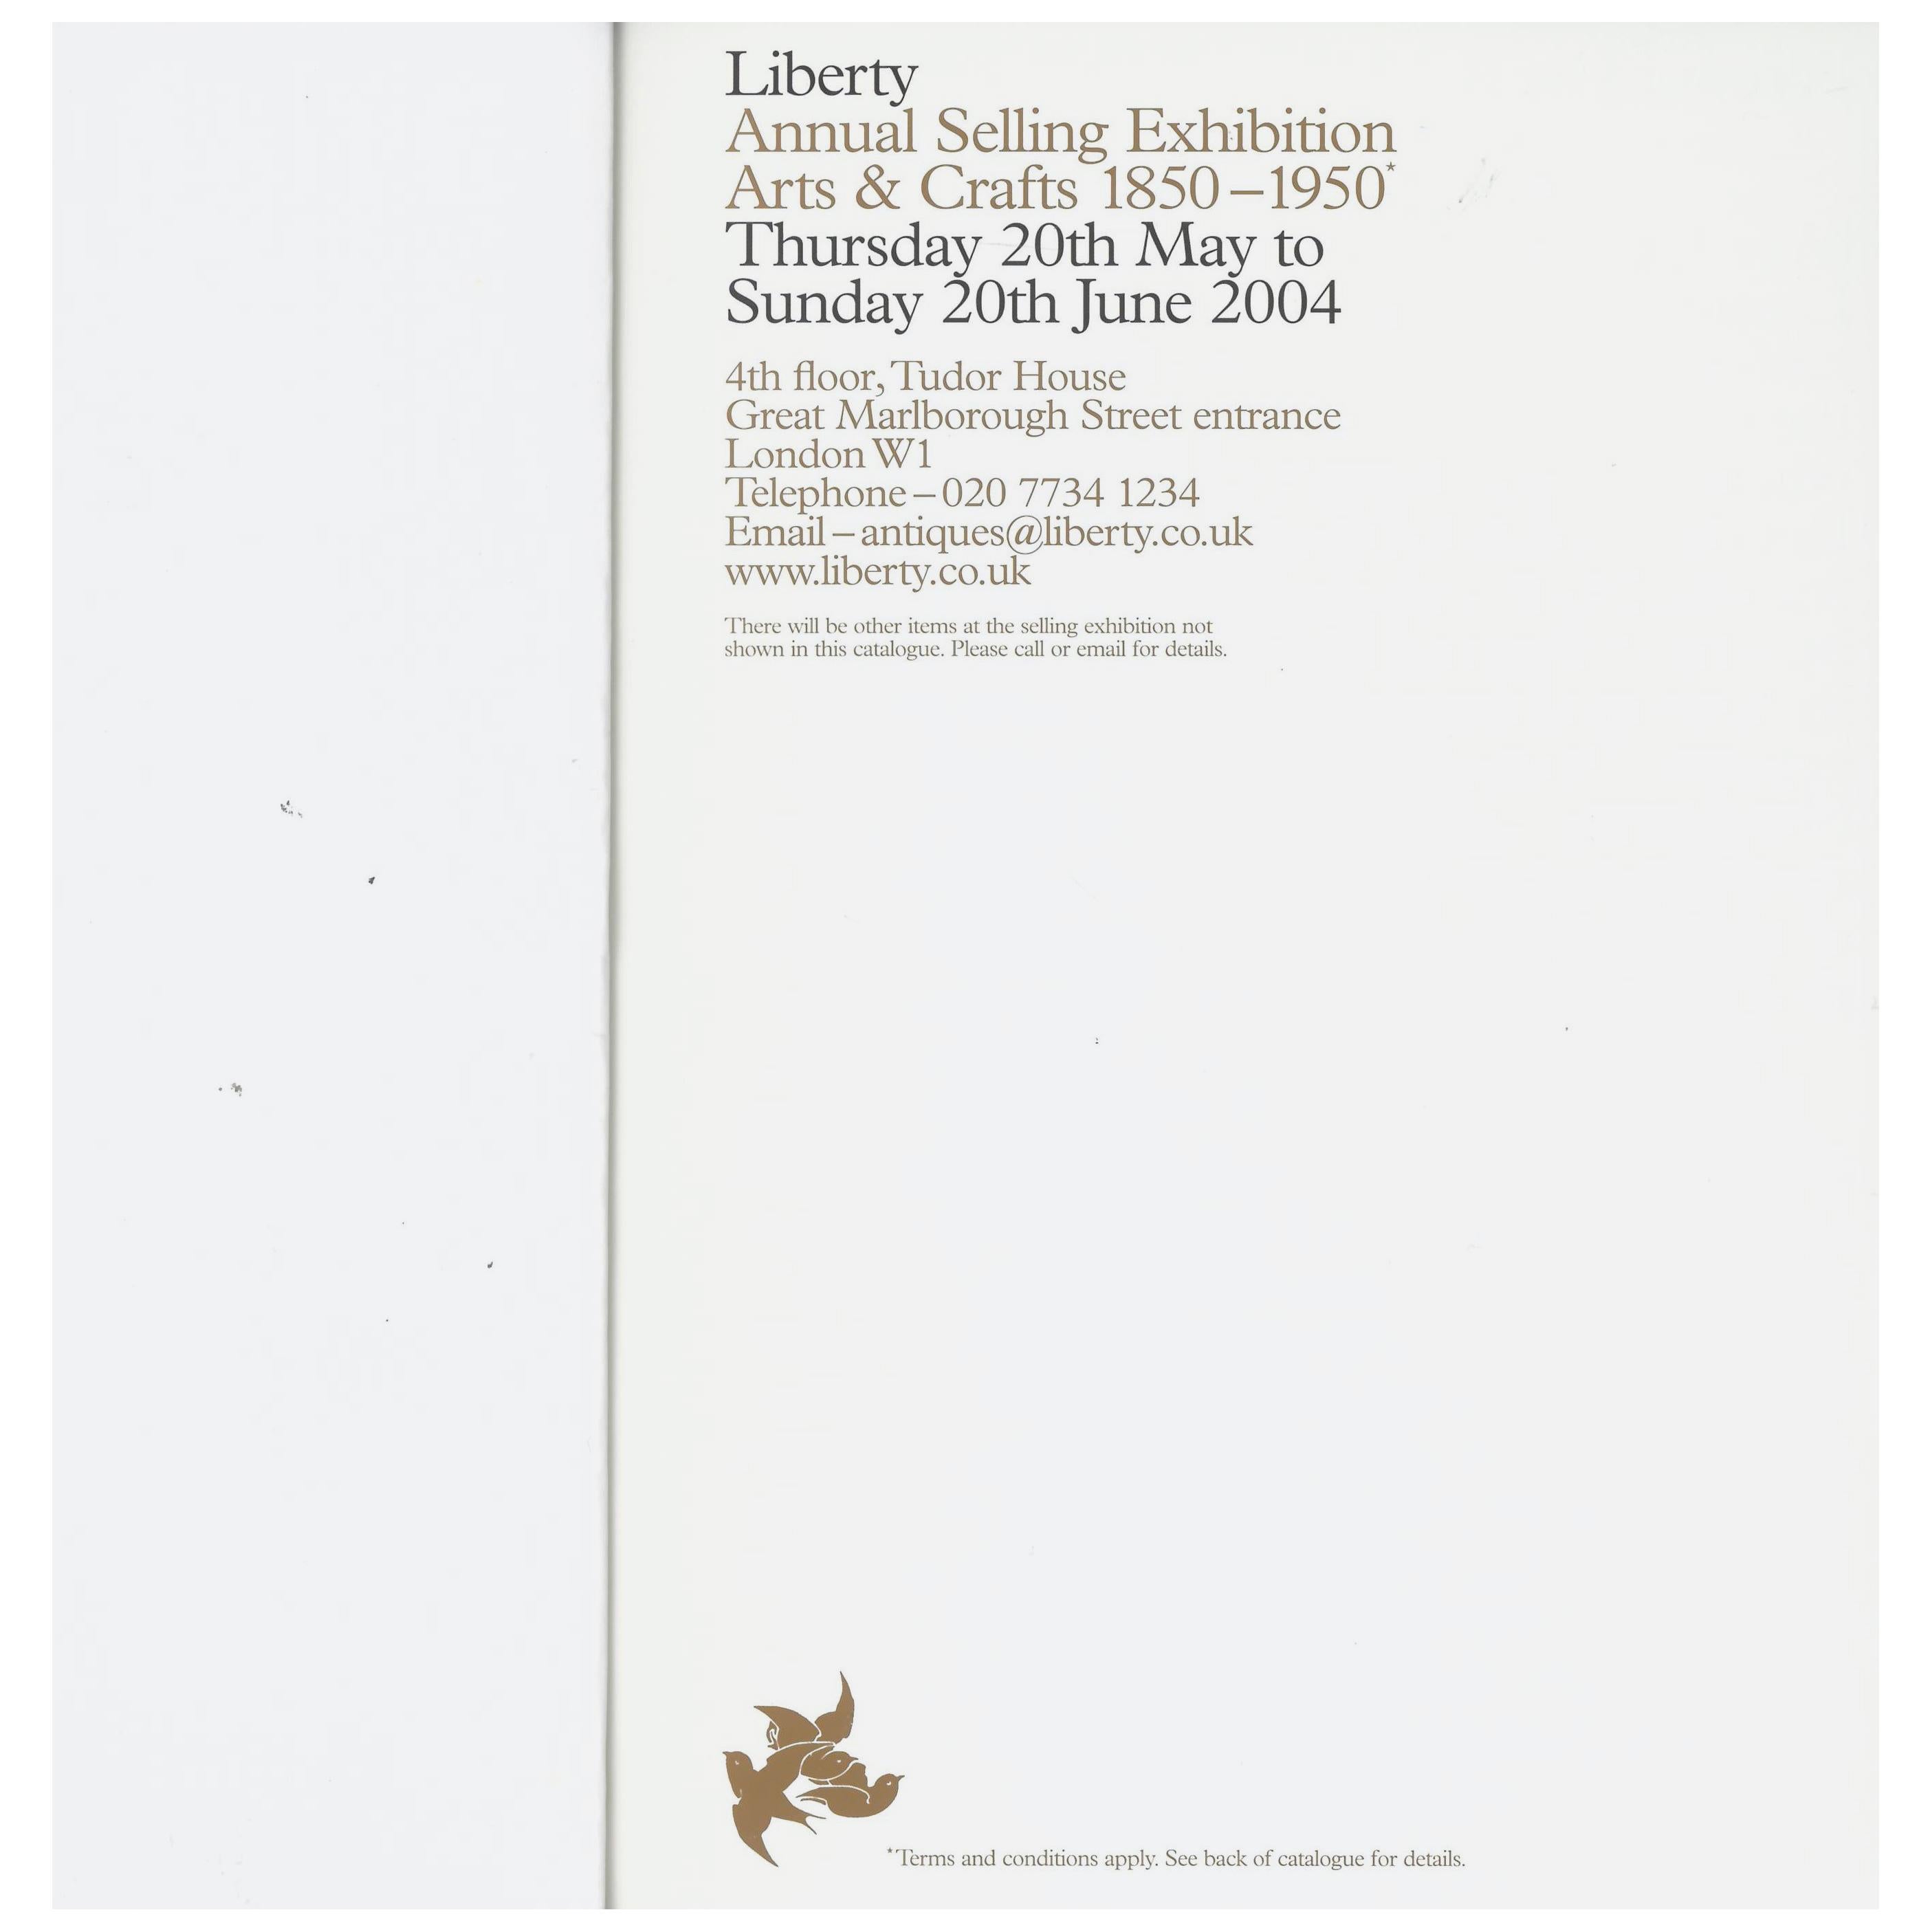 3 Liberty, Arts & Crafts Annual Selling Exhibition 2004/5/6 'Catalogues'